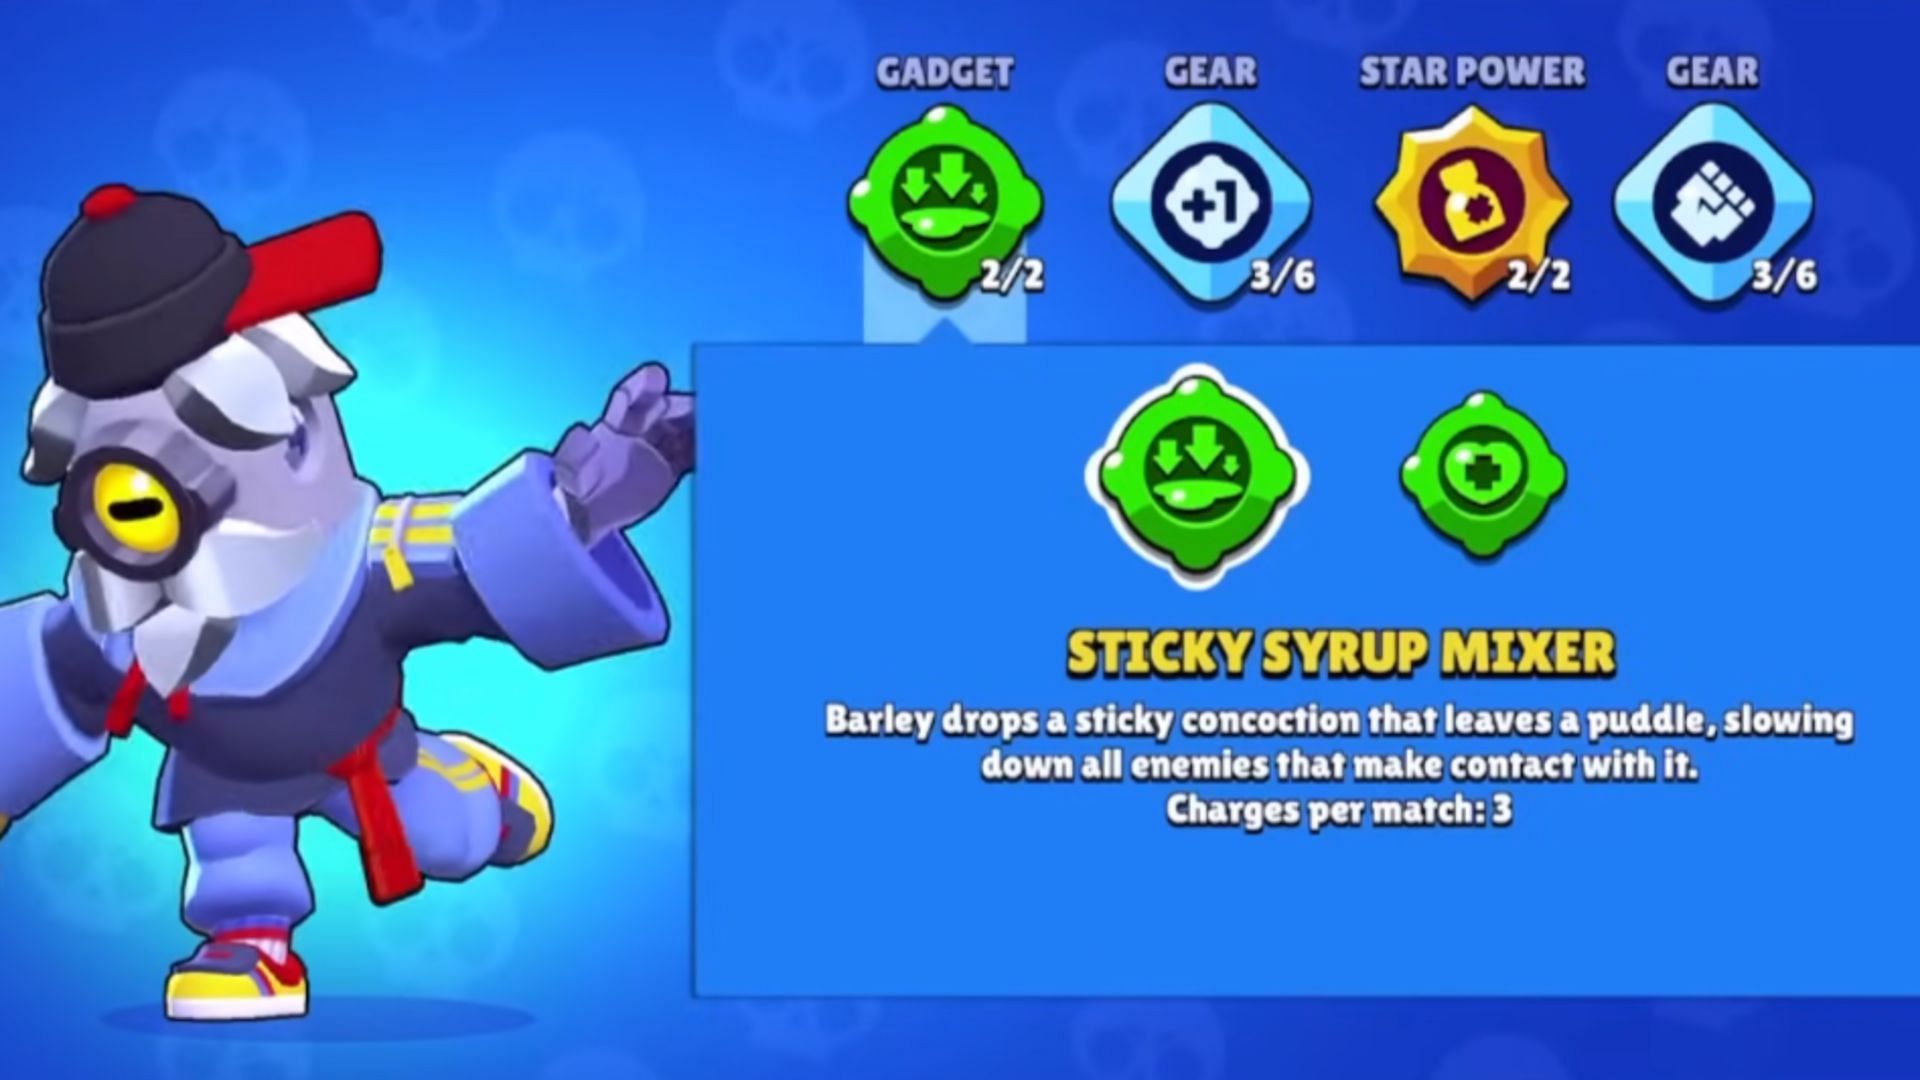 Sticky Syrup Mixer Gadget (Image via Supercell)